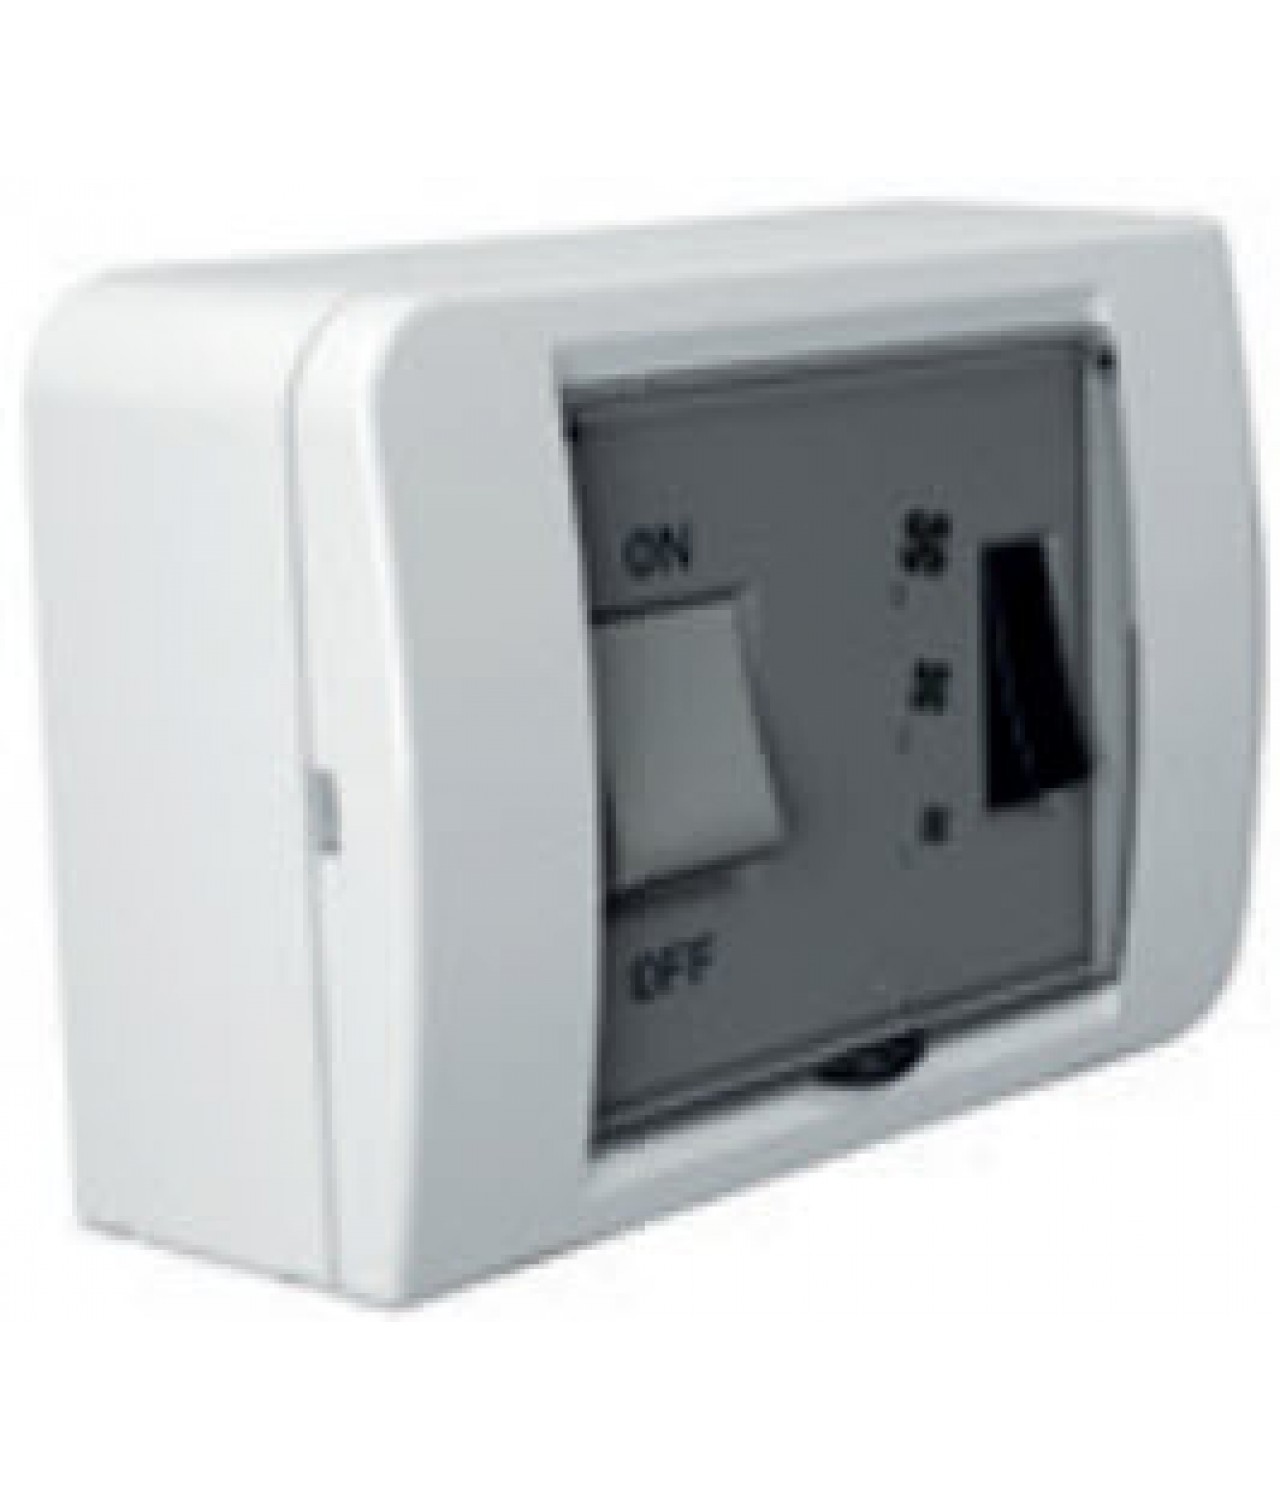 RLS 3V heat recovery unit control panel for AC models, ordered separately